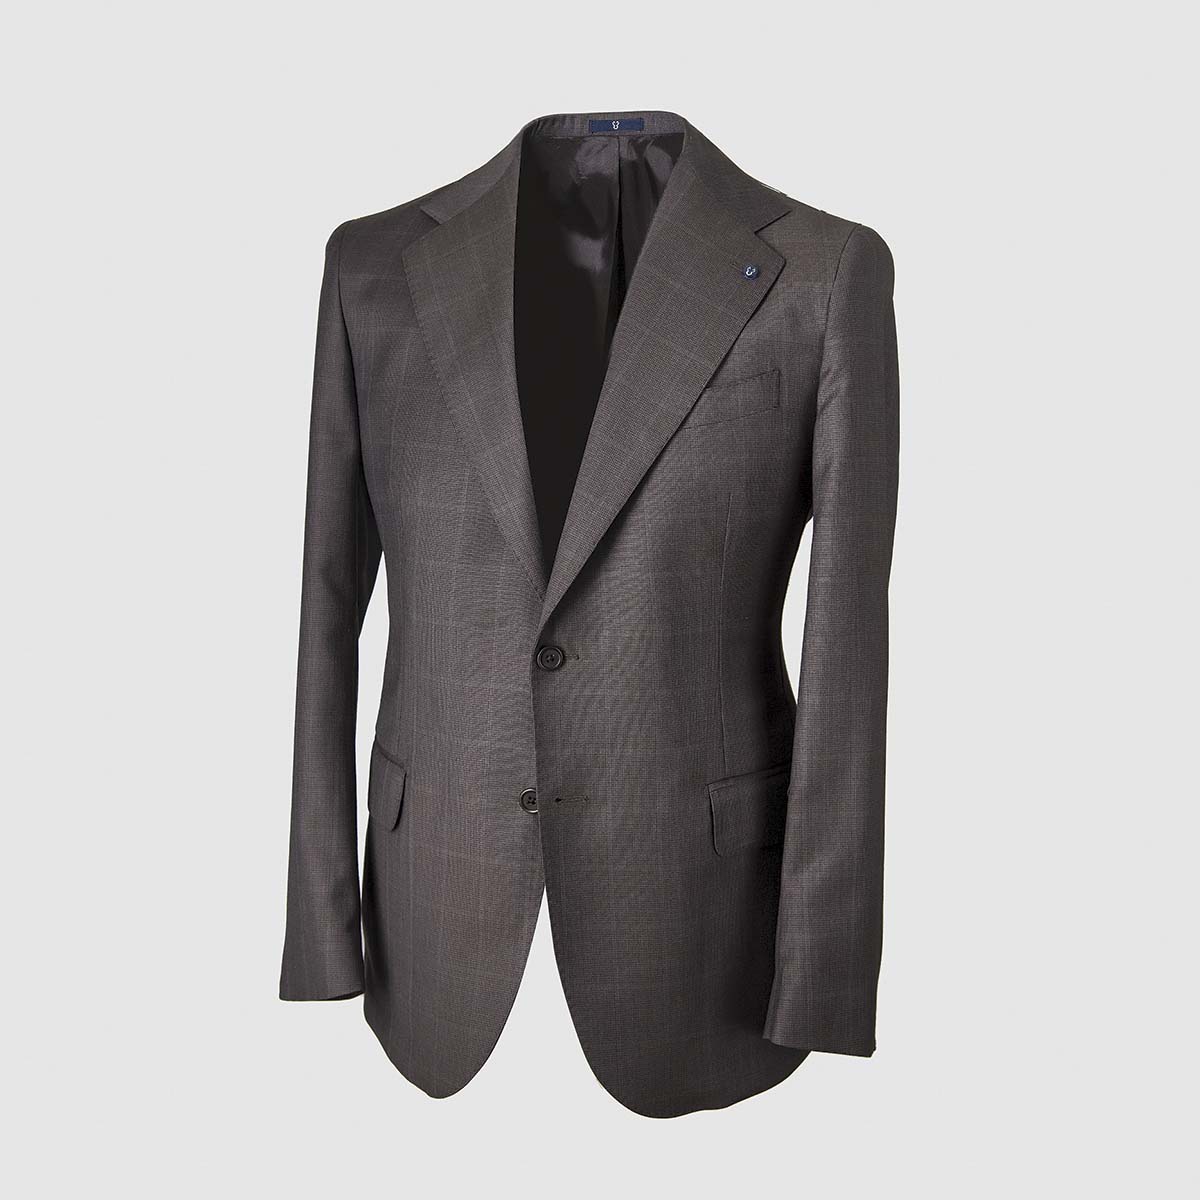 Anthracite Windowpane Pattern Smart Suit in 130s  Four Seasons Wool Melillo 1970 on sale 2022 2